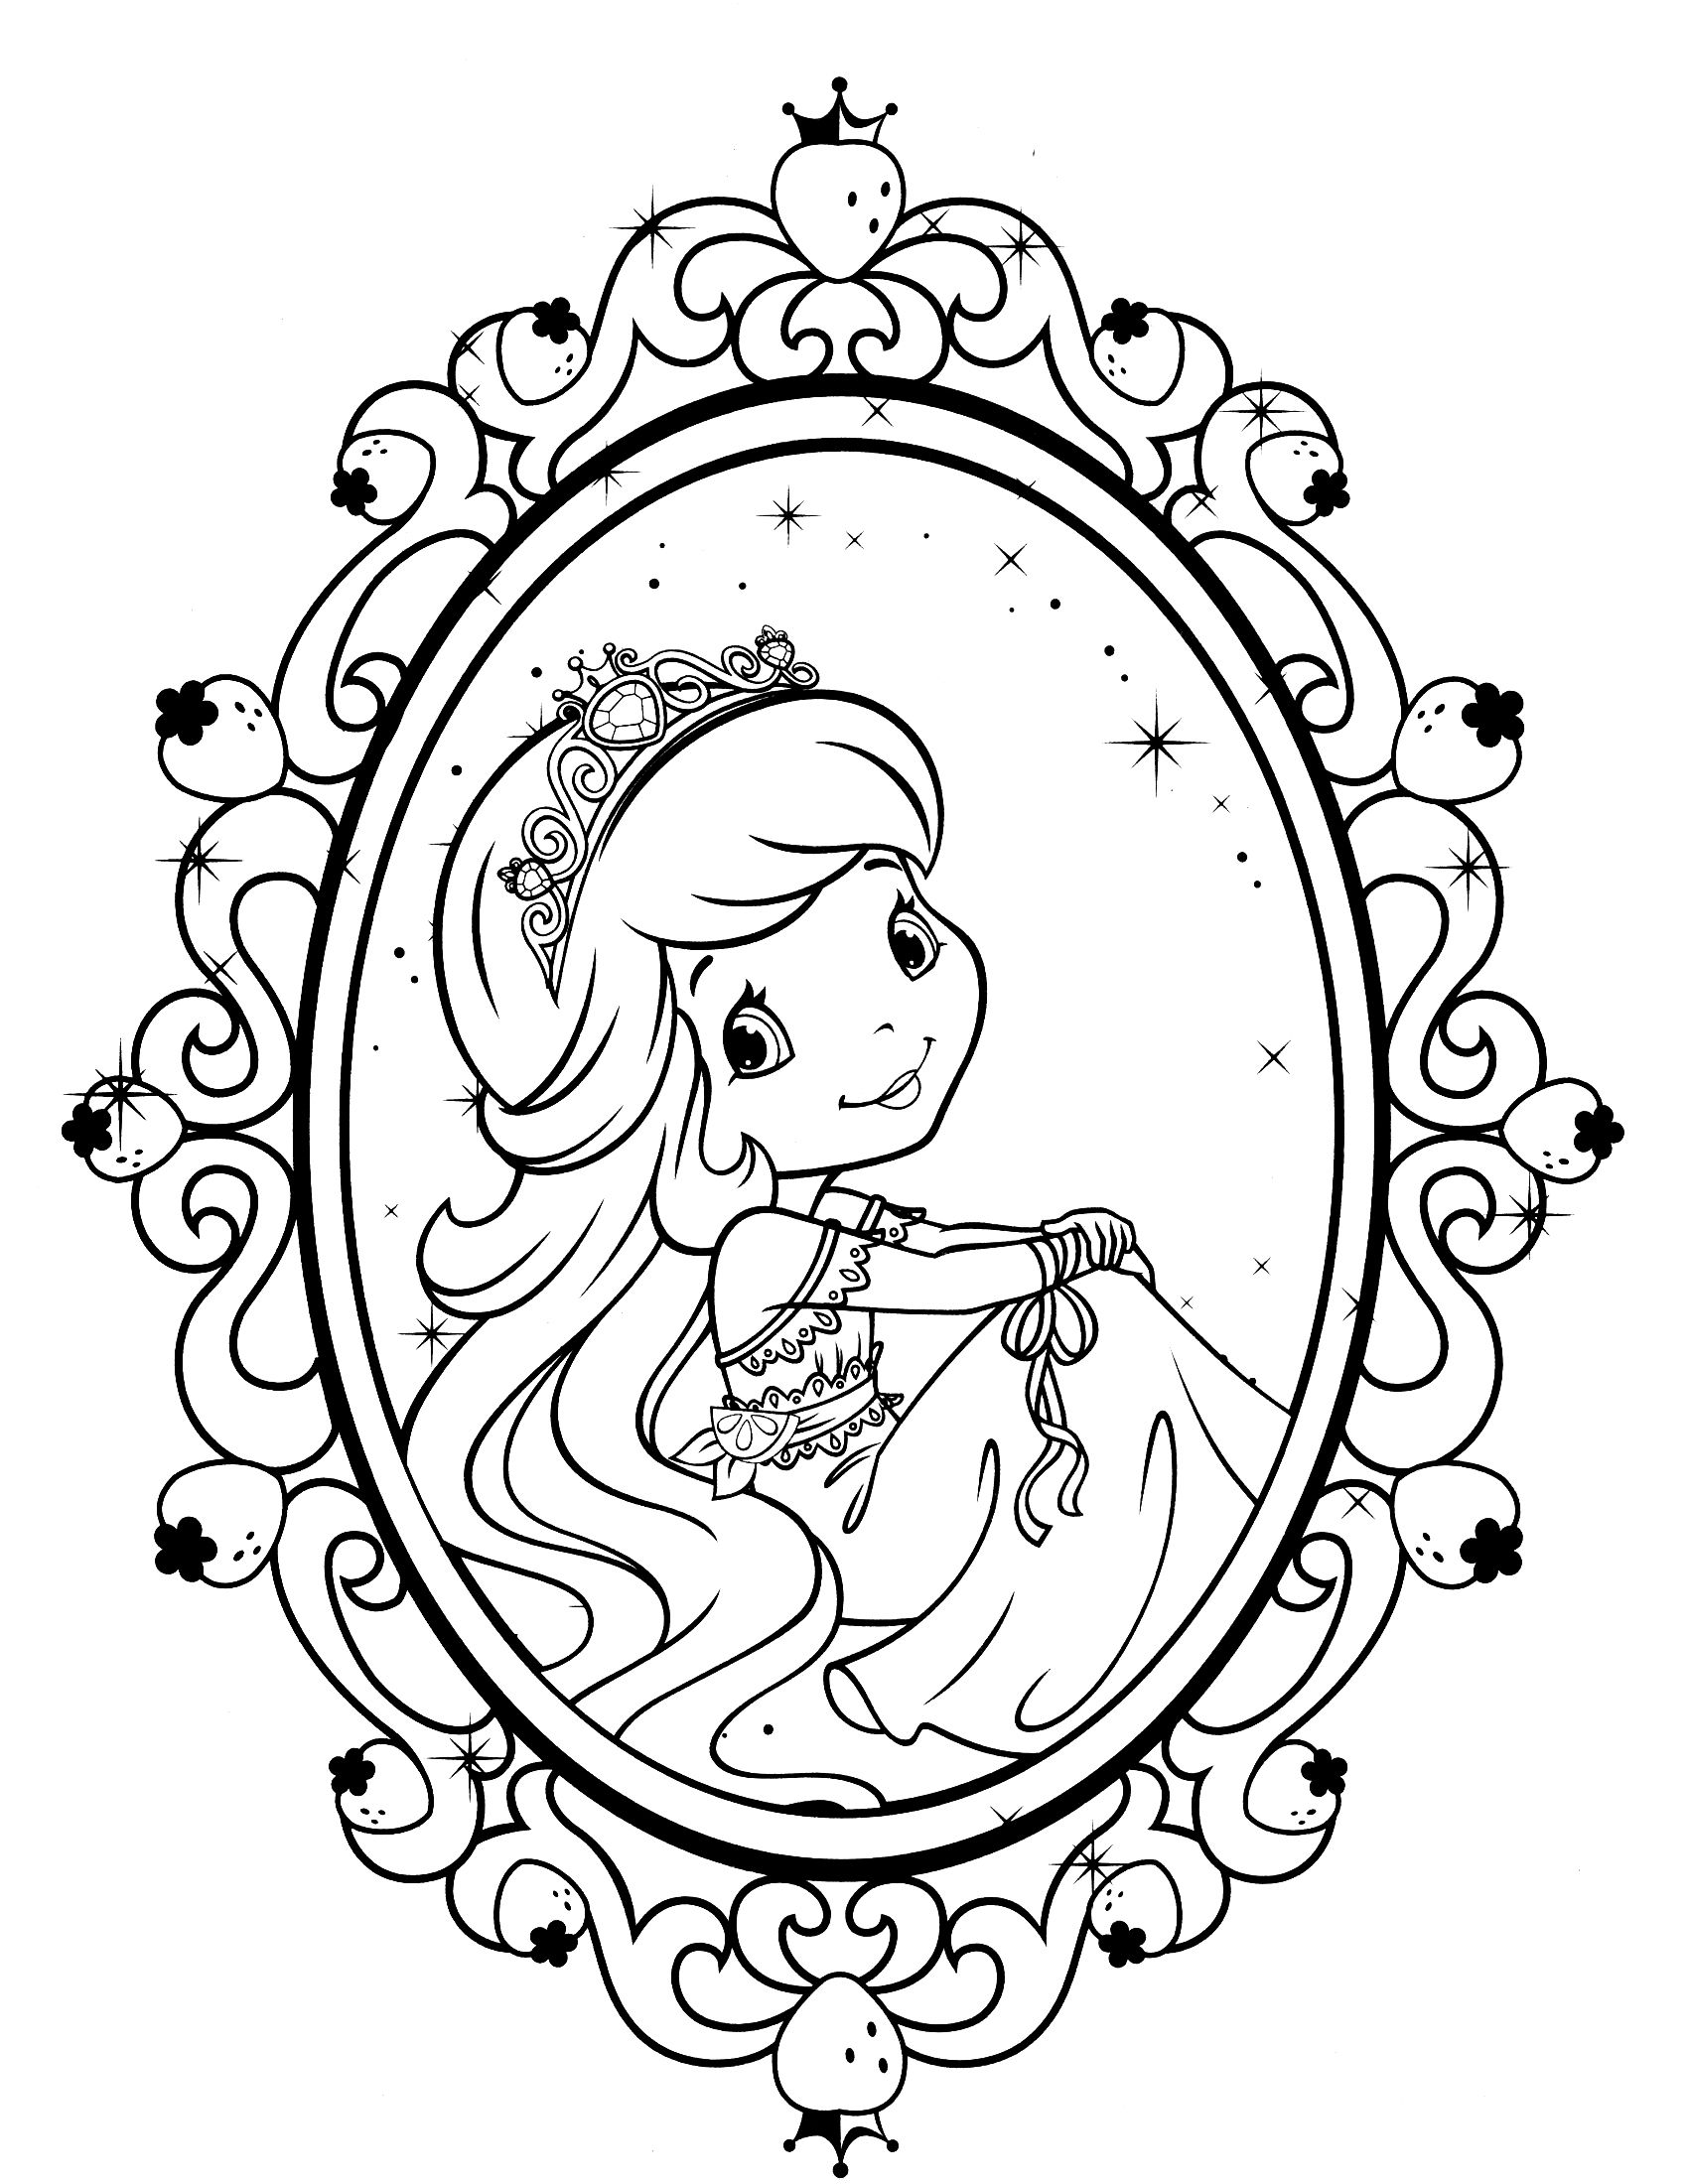 coloring pages of strawberry shortcake